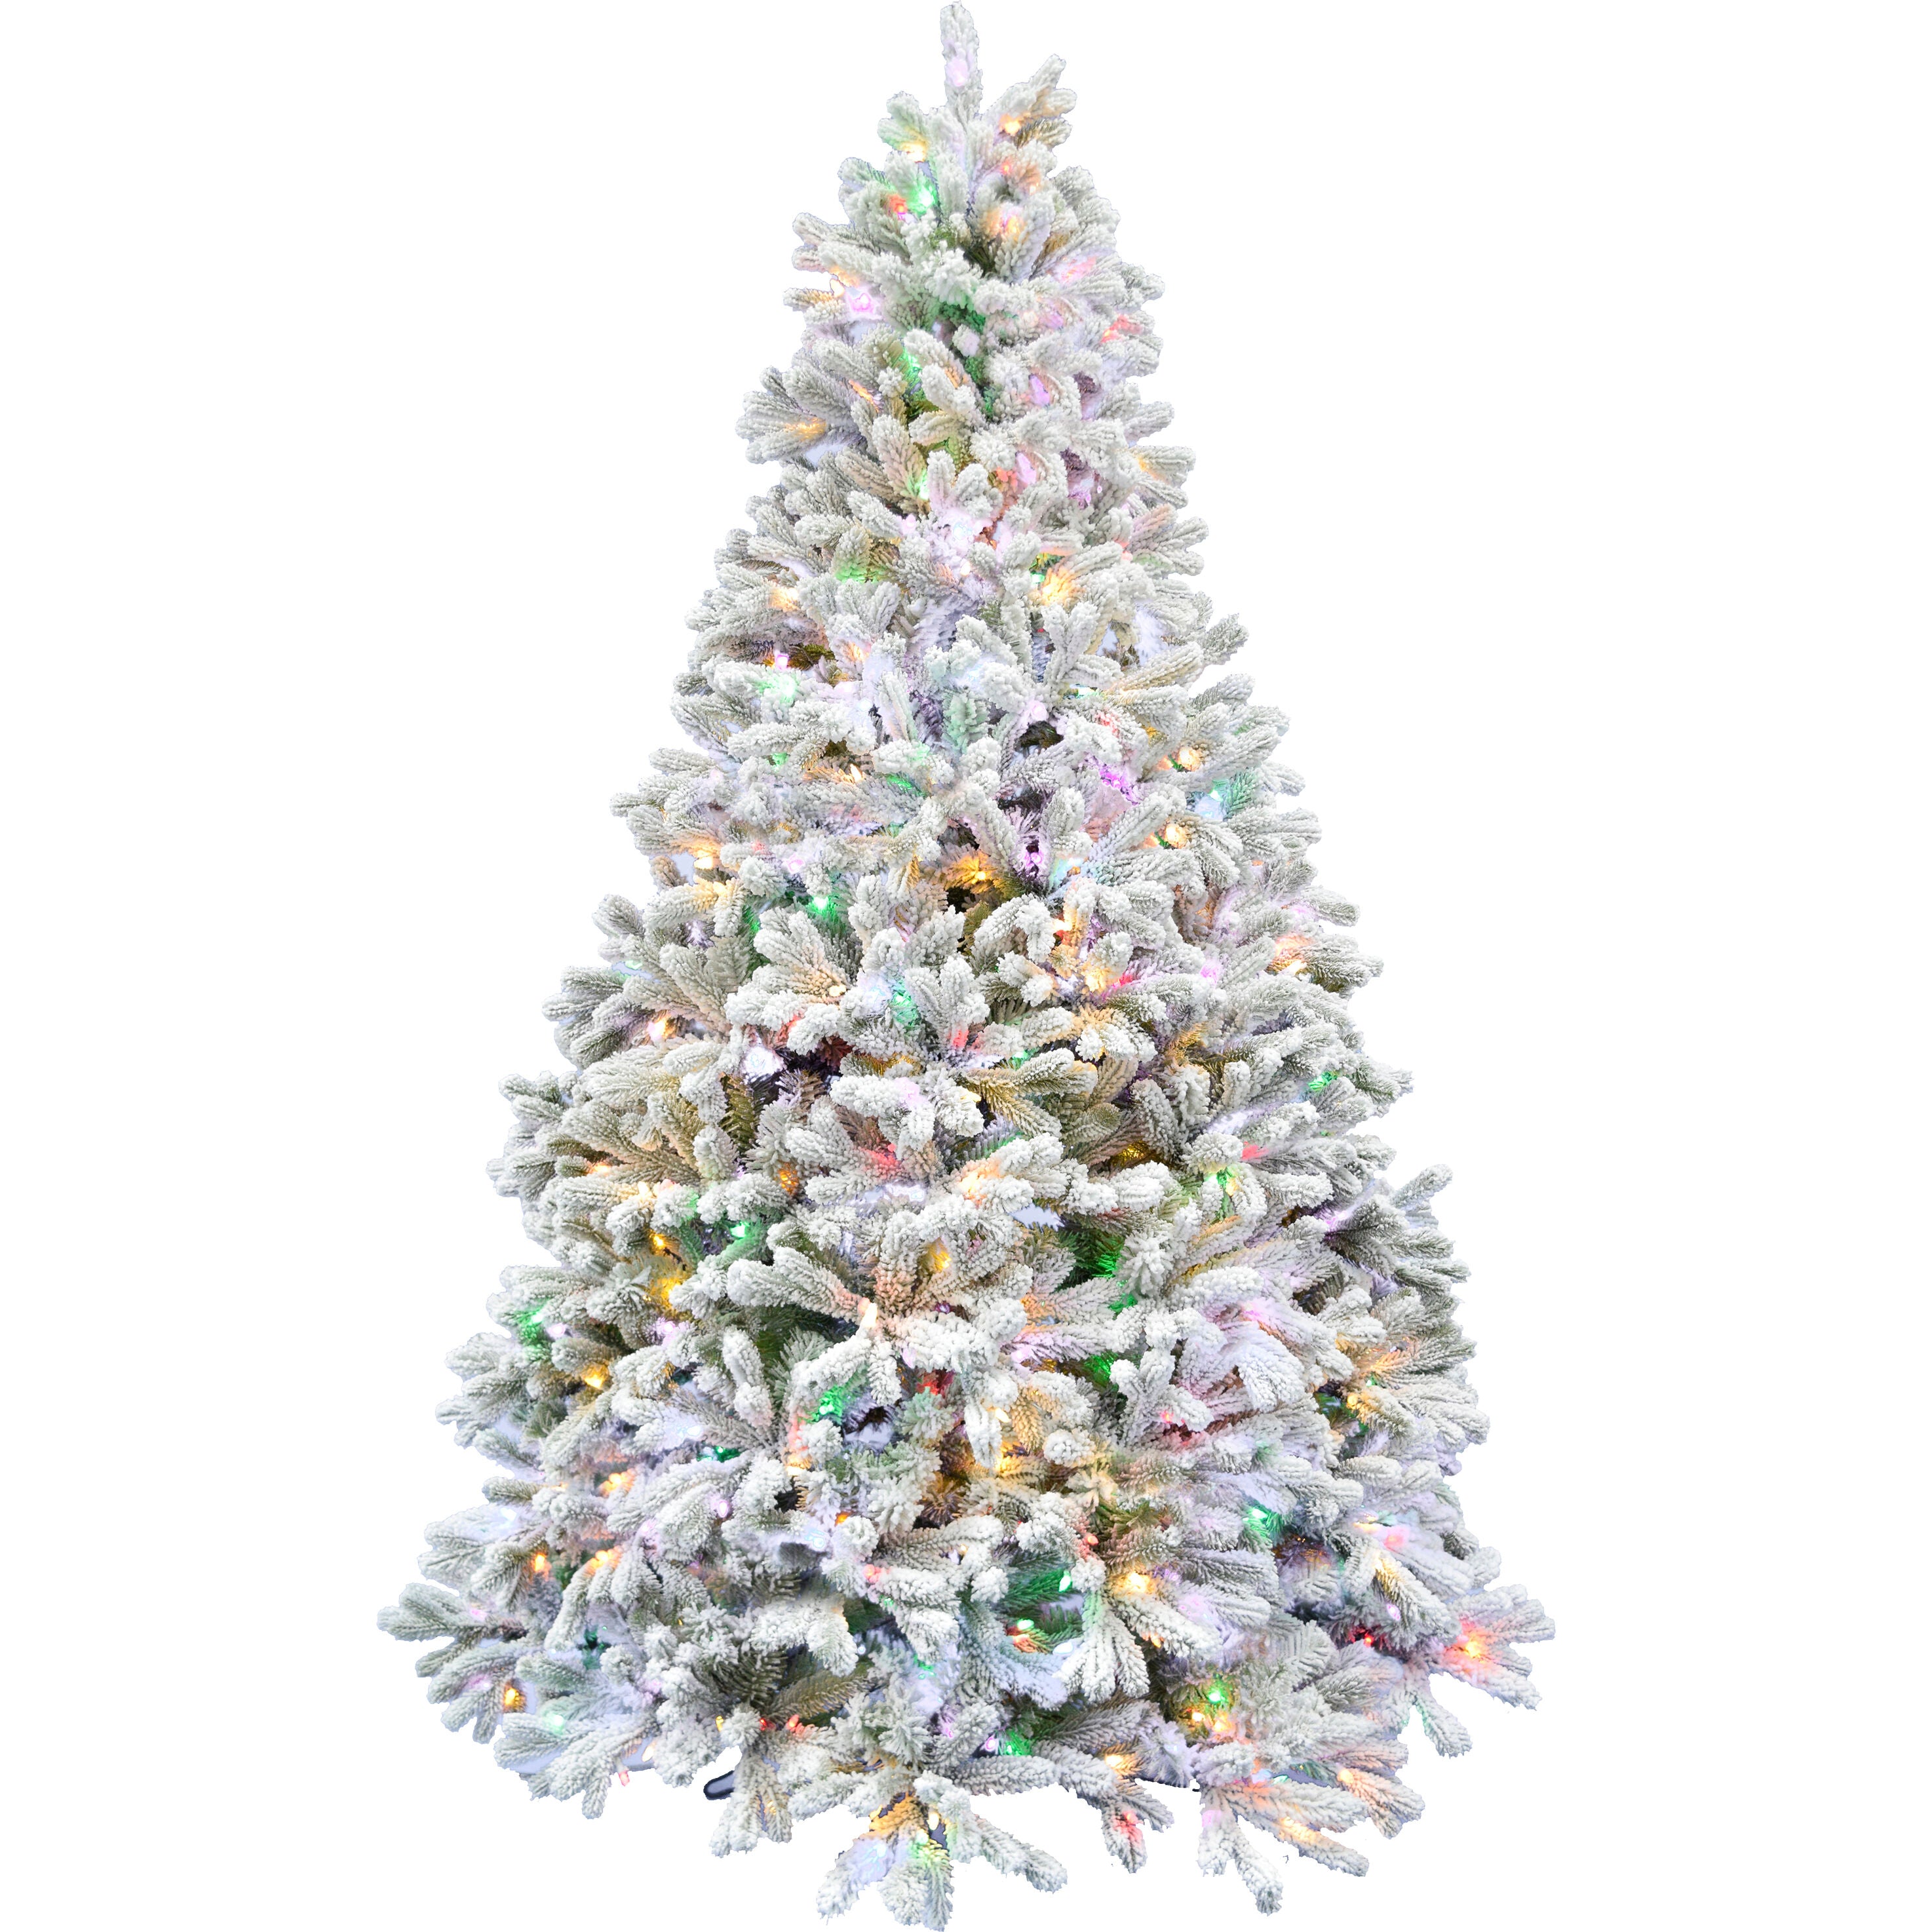 Fraser Hill Farm -  7.5-ft. Flocked Christmas Half Tree with Flock and Multicolored LED Lighting